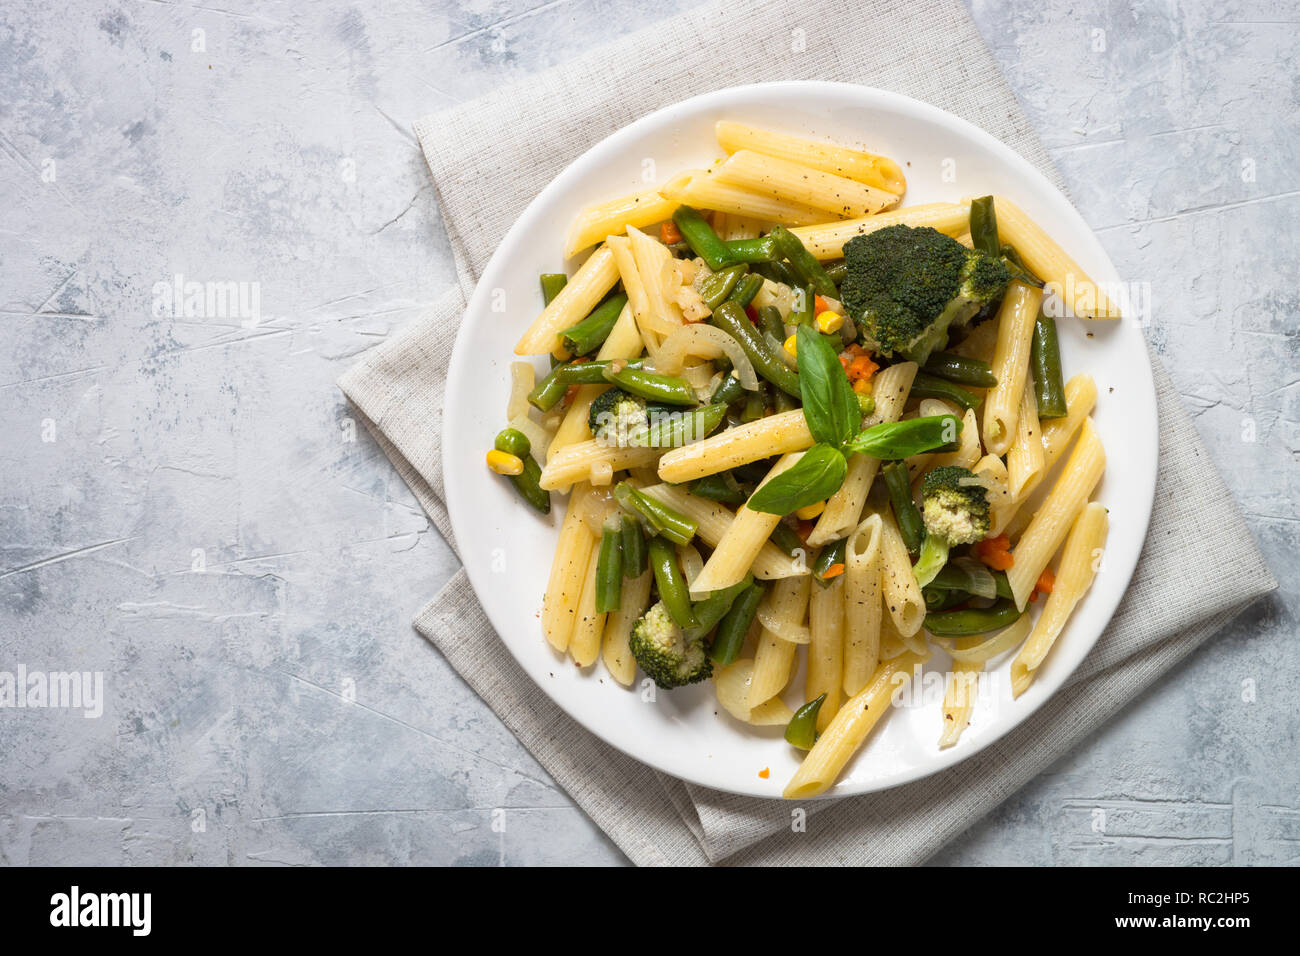 Italian vegetarian pasta penne with green vegetables Stock Photo - Alamy